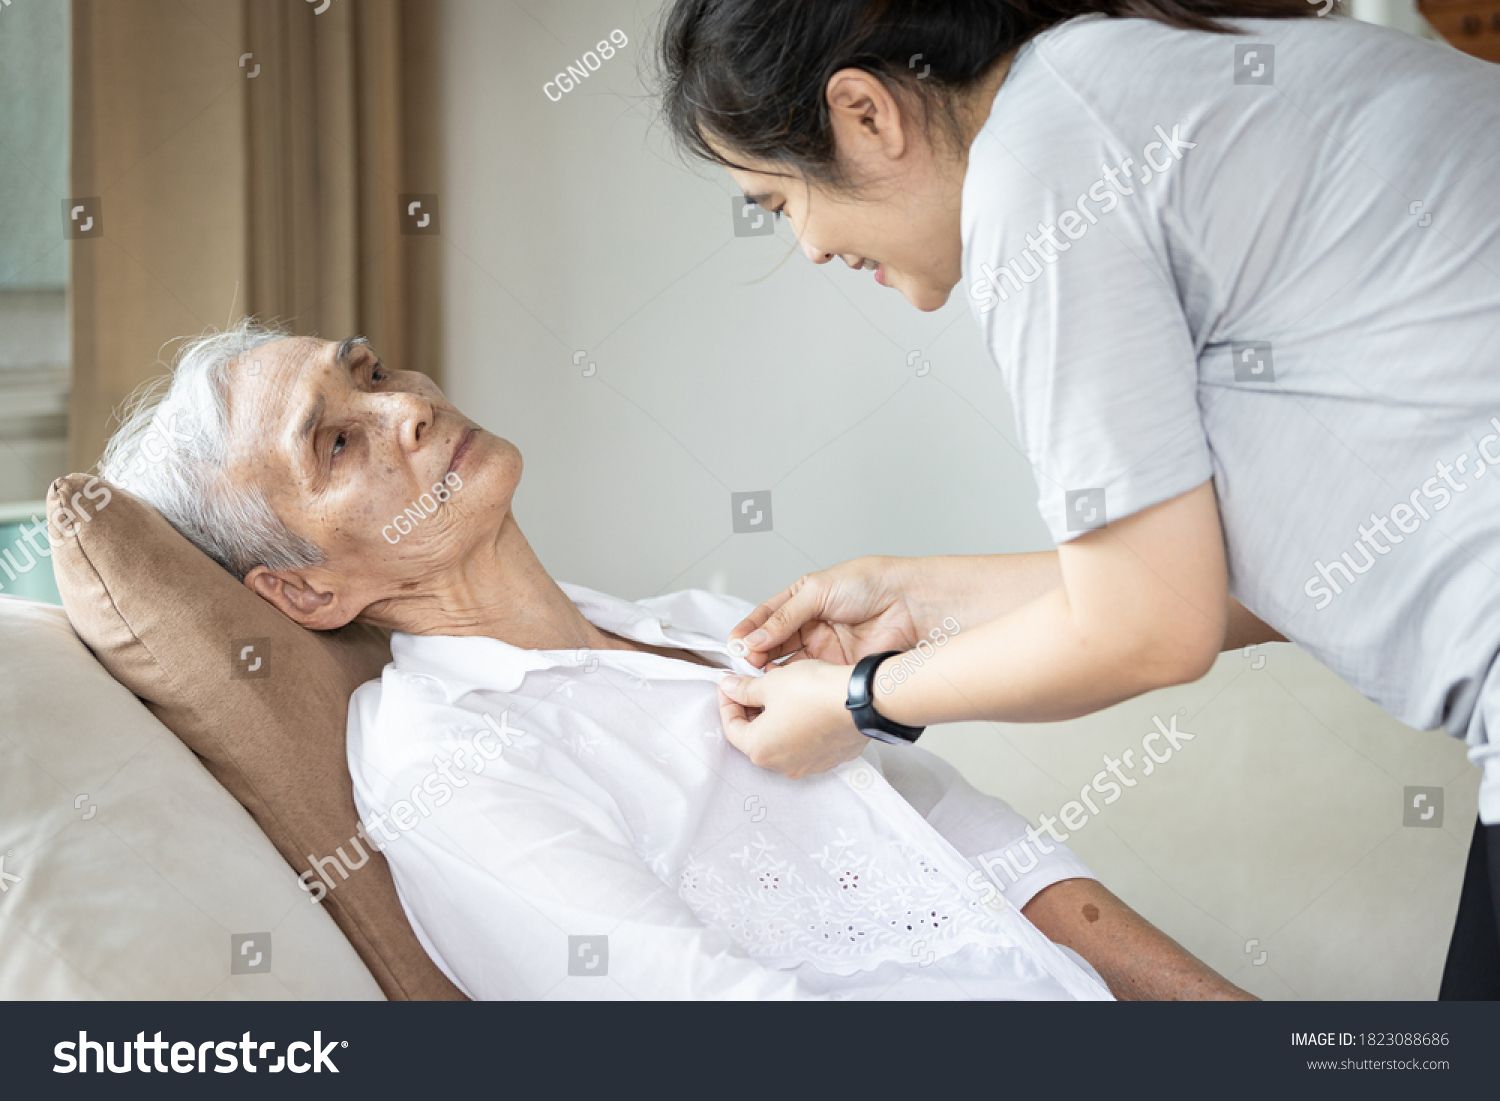 Asian female caregiver taking care of helping elderly patient get dressed,button on the shirt or changing clothes for a paralyzed person,senior woman with paralysis of limbs,body or muscles weakness #1823088686